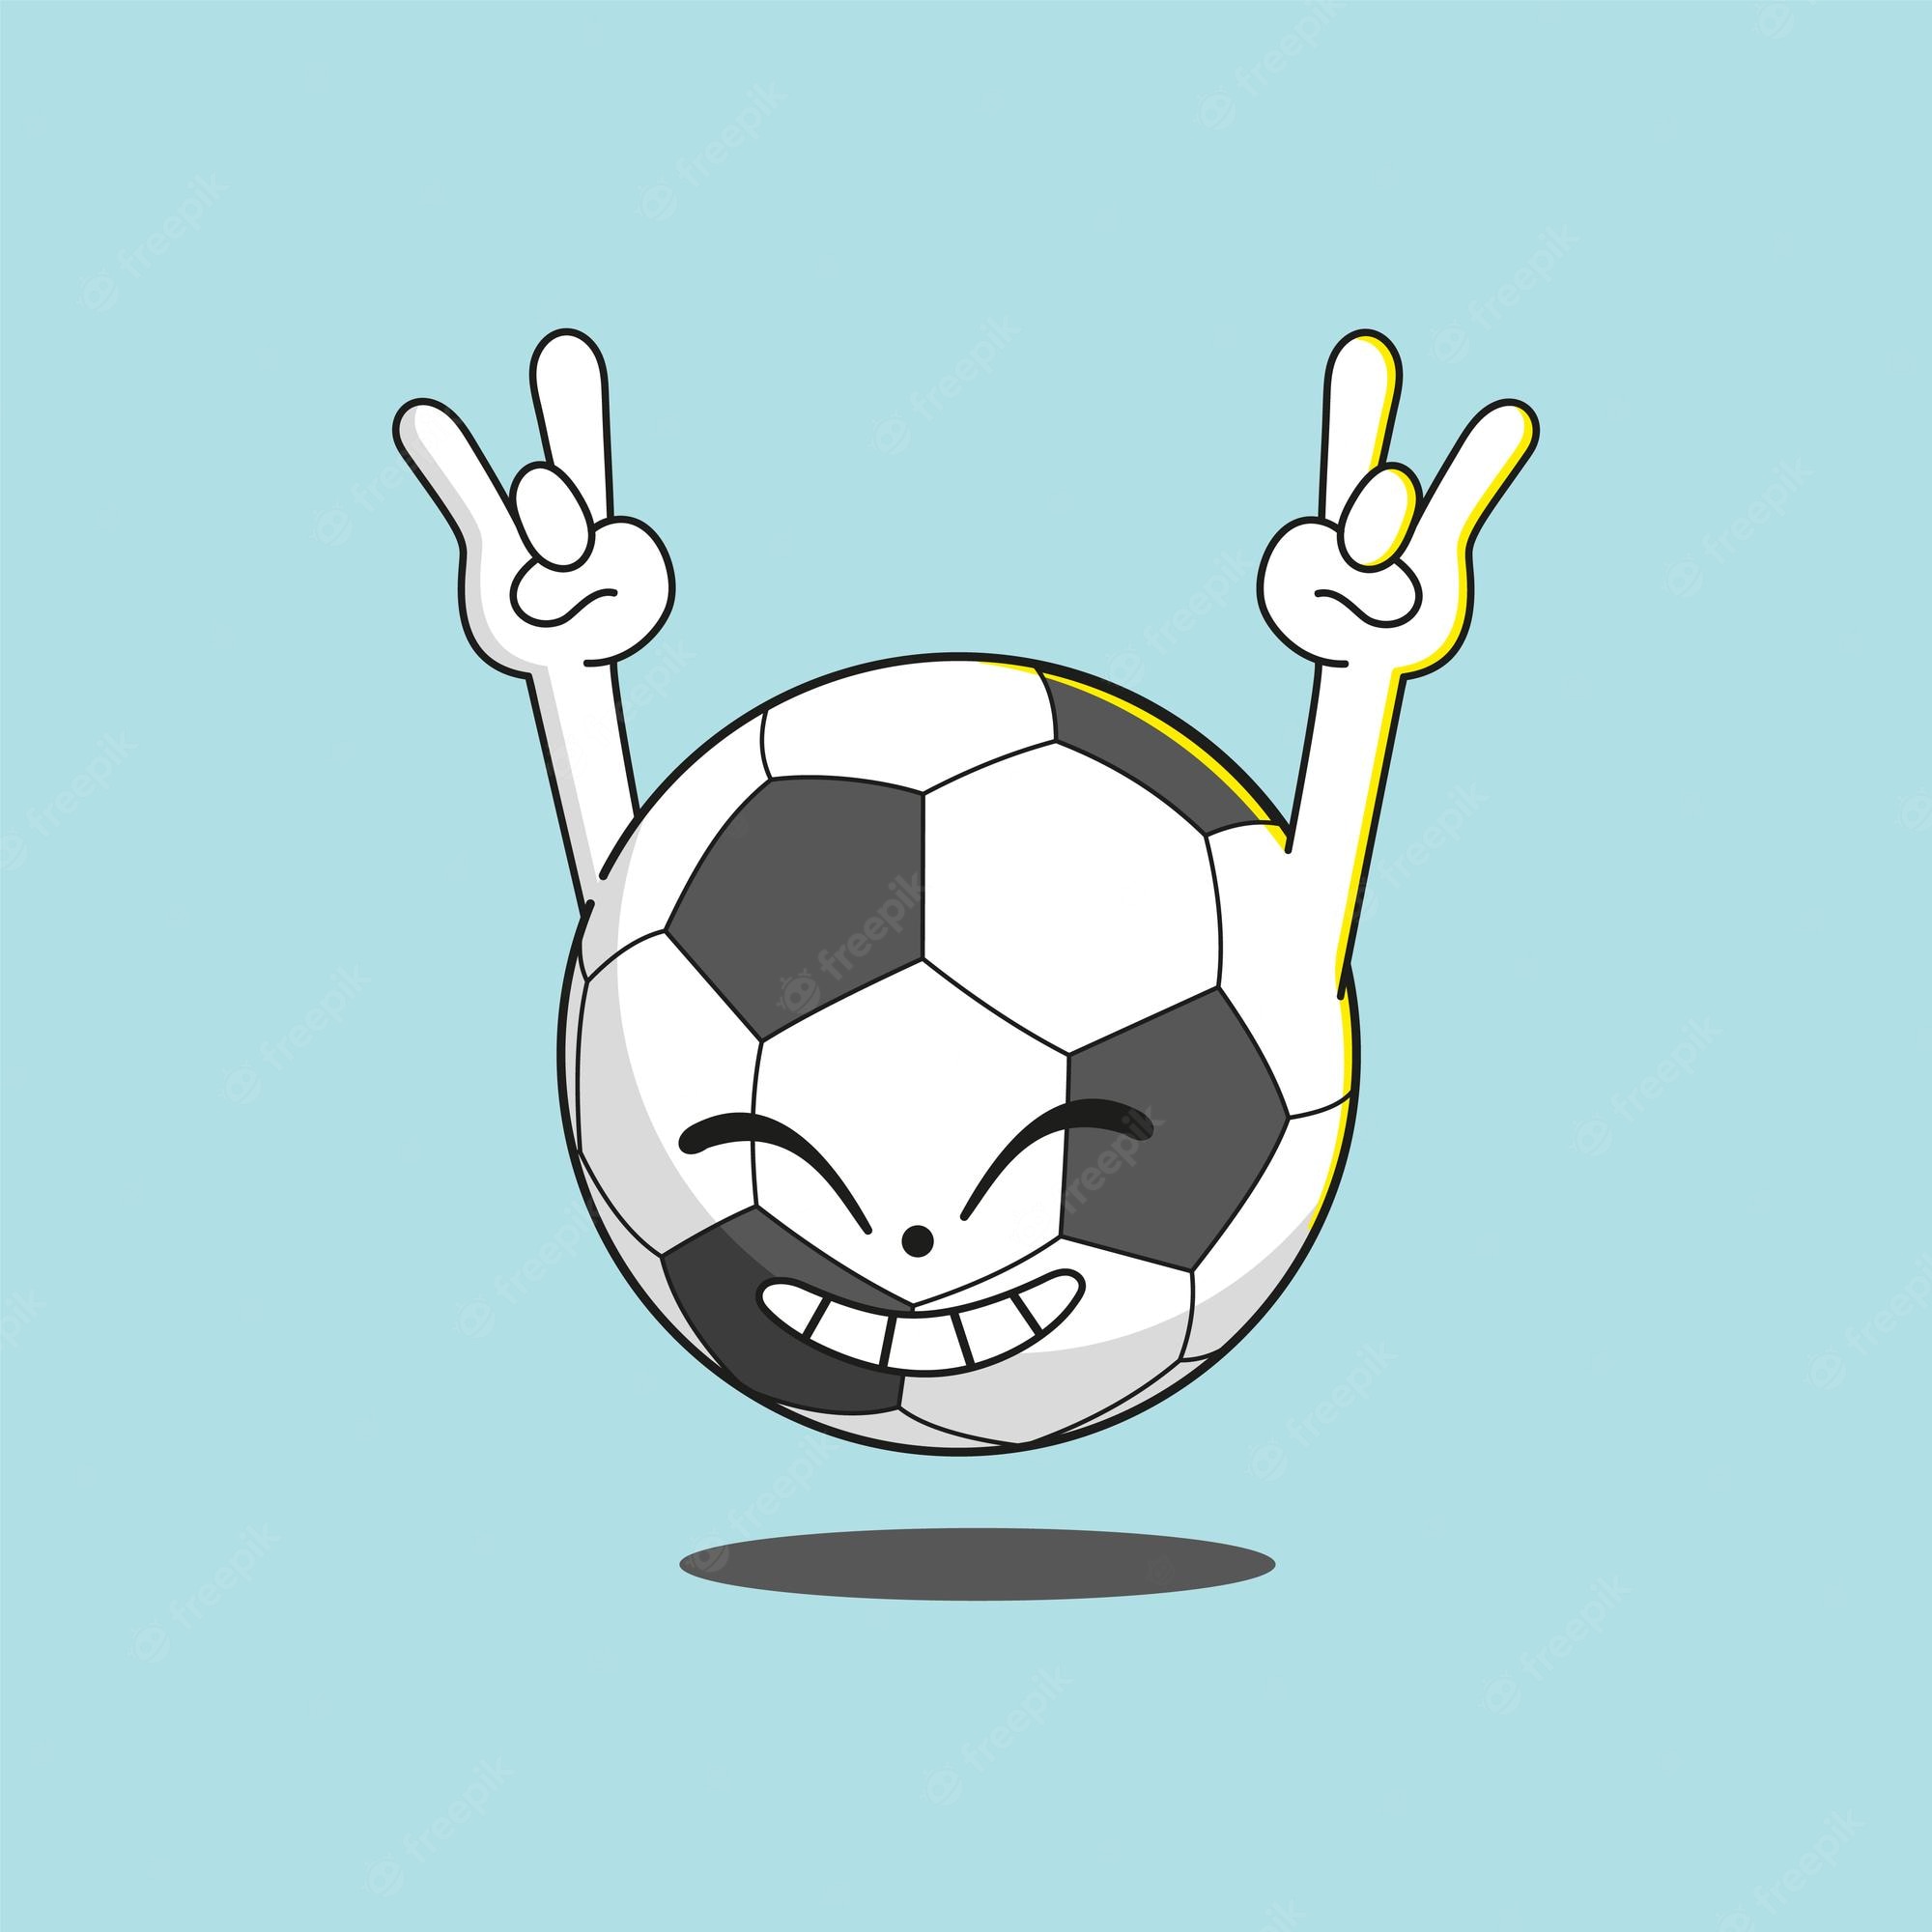 https://clipart-library.com/2023/cartoon-win-game-soccer-ball-cute-illustration-isolated-background_756939-34.jpg